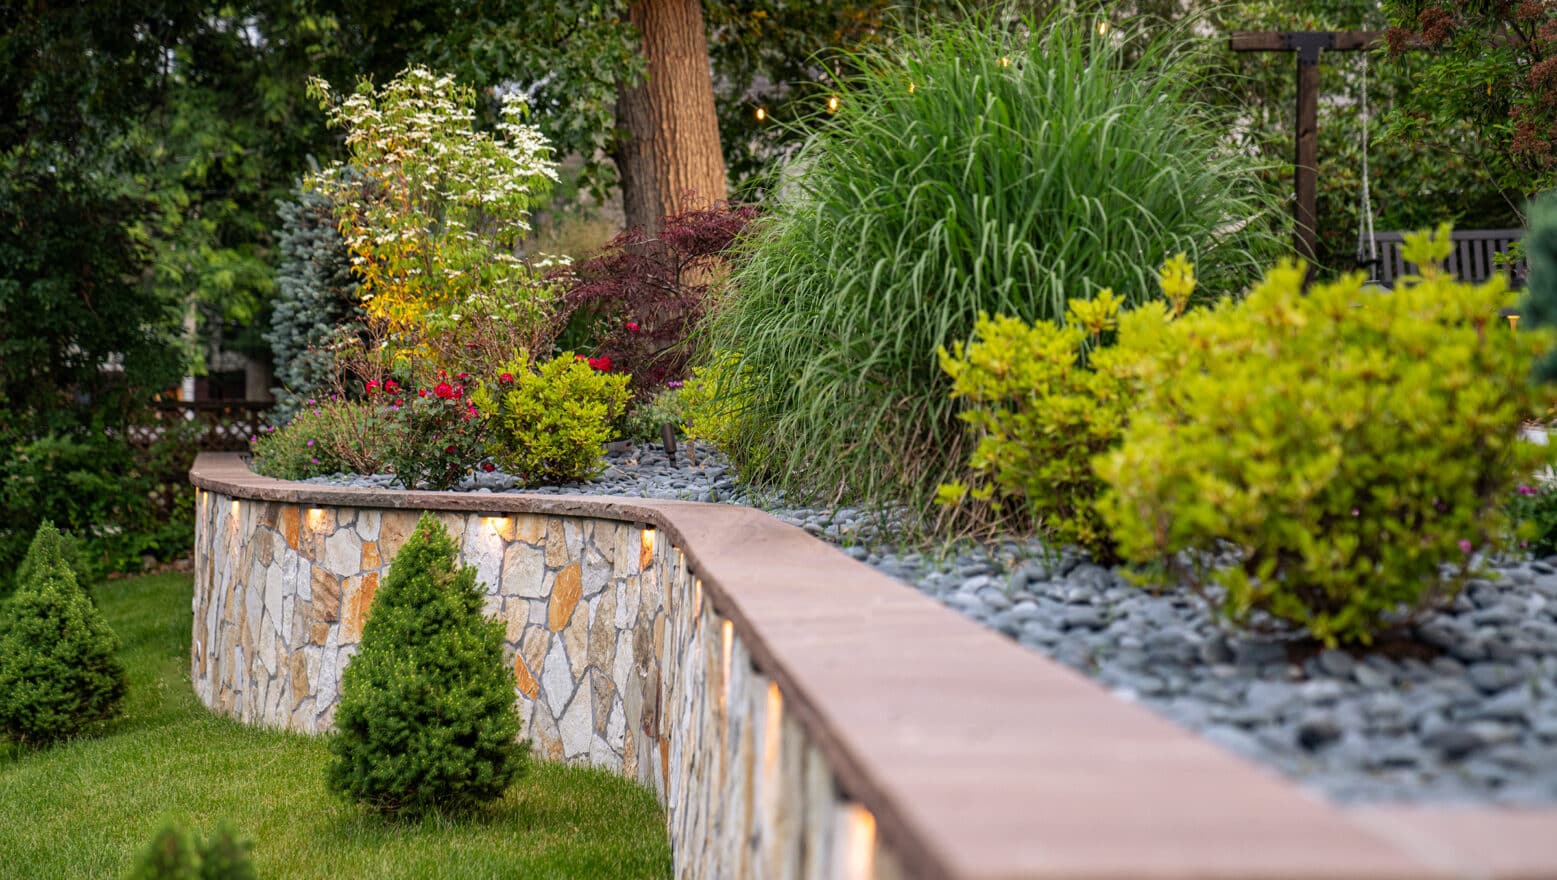 A stone retaining wall with built-in low voltage landscape lighting in Needham, MA.